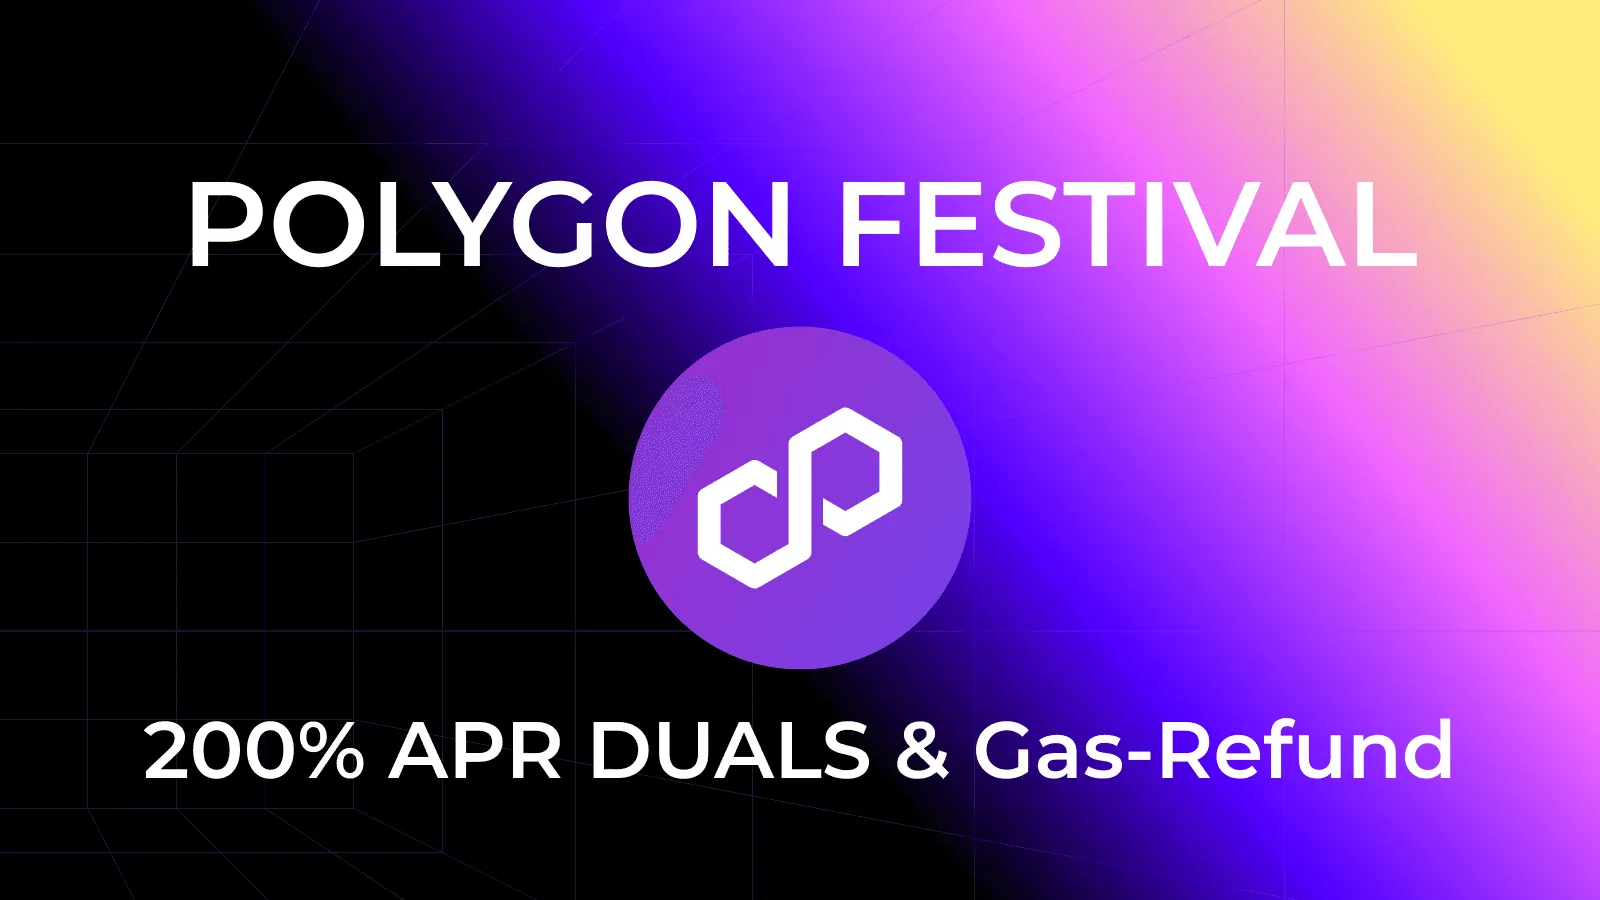 Gas-Refund For Polygon (MATIC) Duals with 200% APR